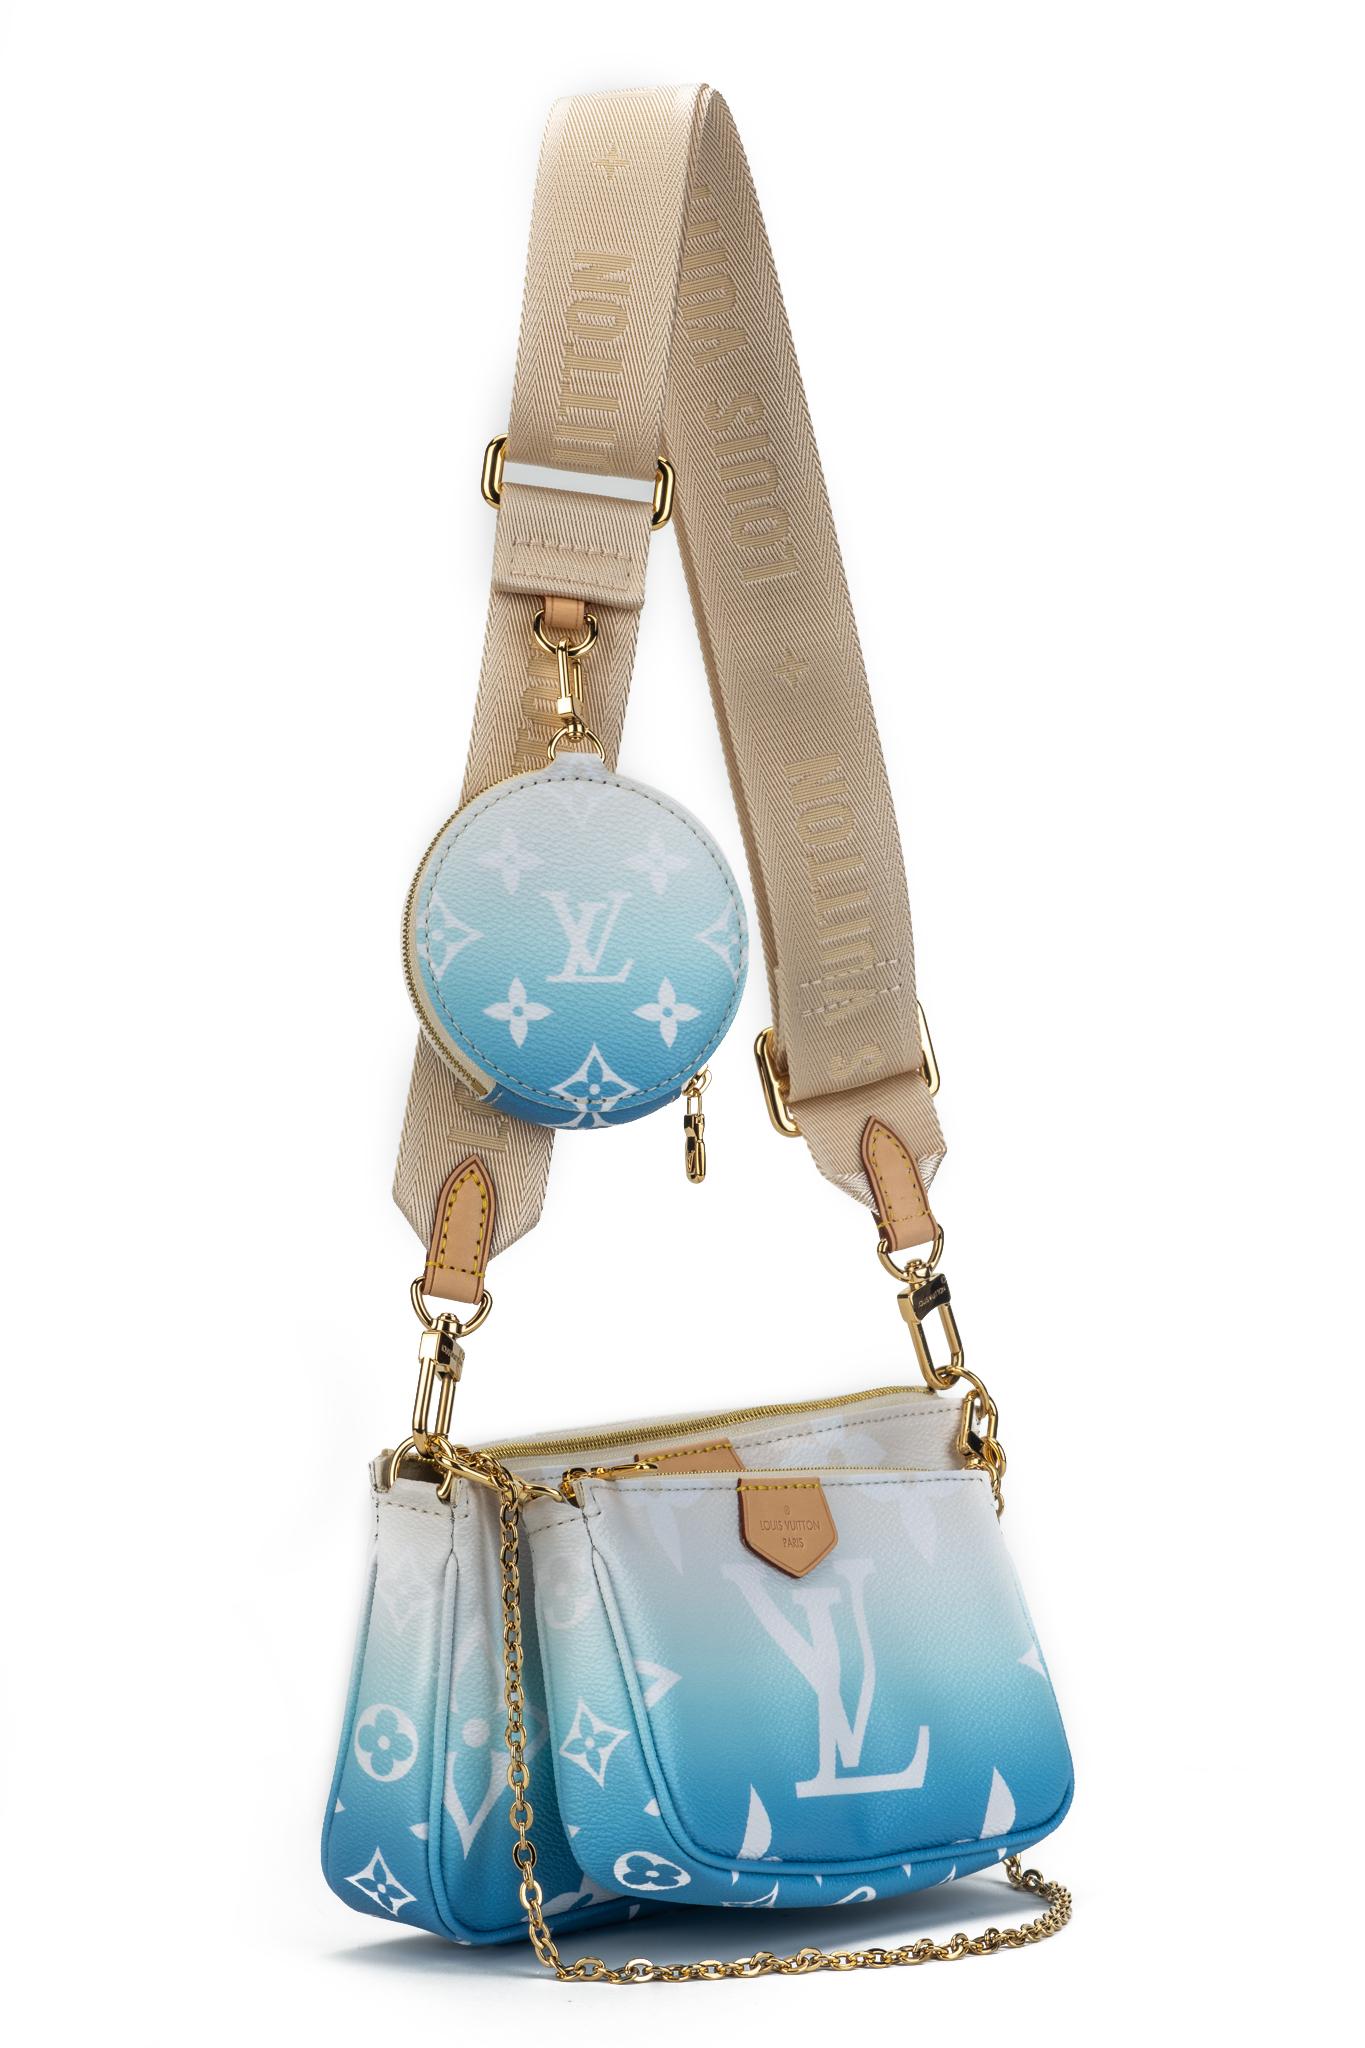 Louis Vuitton hot season ticket multi pochette in coated monogram degrade' blue canvas and gold detail. Sold out worldwide. Composed of three detachable parts: cross body, pochette and round coin purse. Adjustable strap. Comes with dust cover and